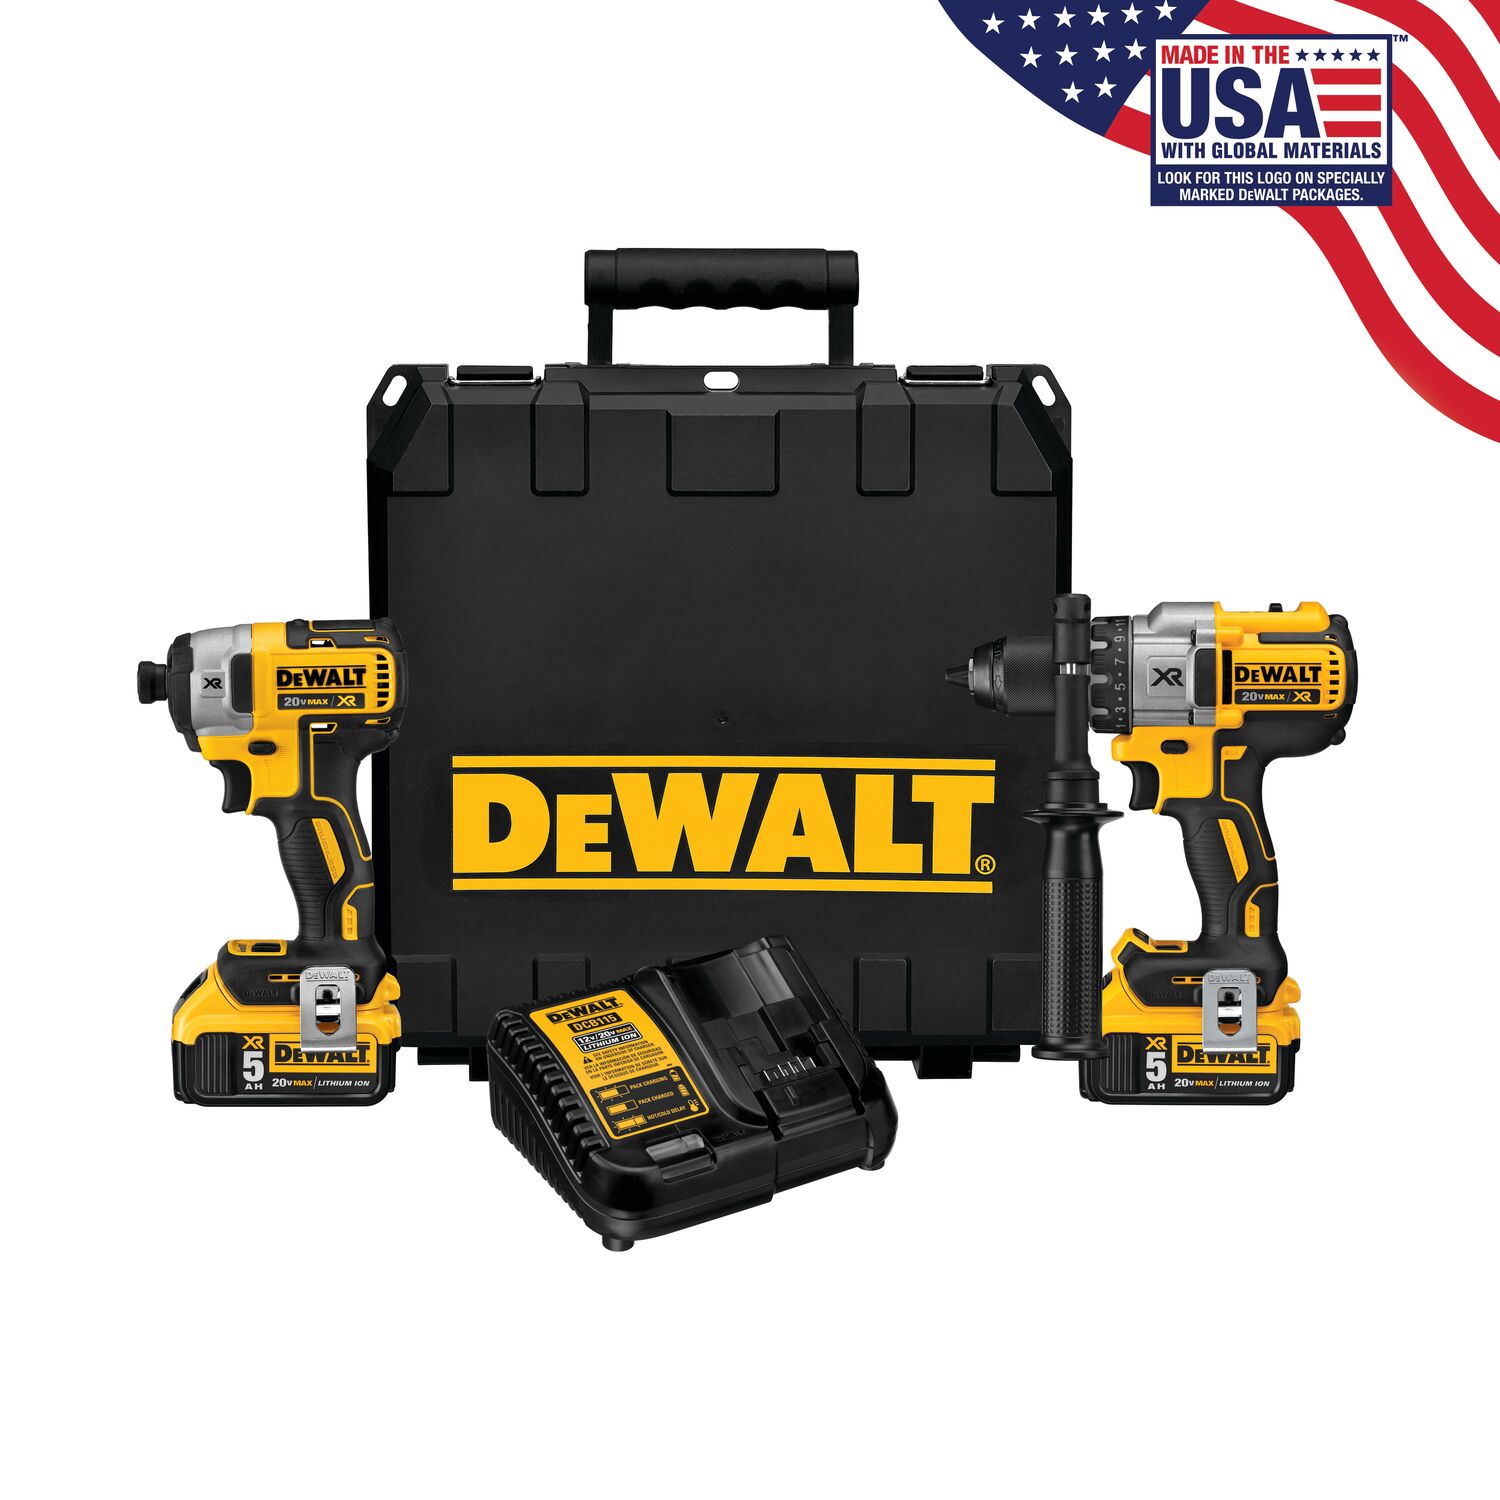 DEWALT XR 2-Tool 20-Volt Brushless Power Tool Combo Kit with Hard Case and charger Included) in the Power Combo Kits at Lowes.com